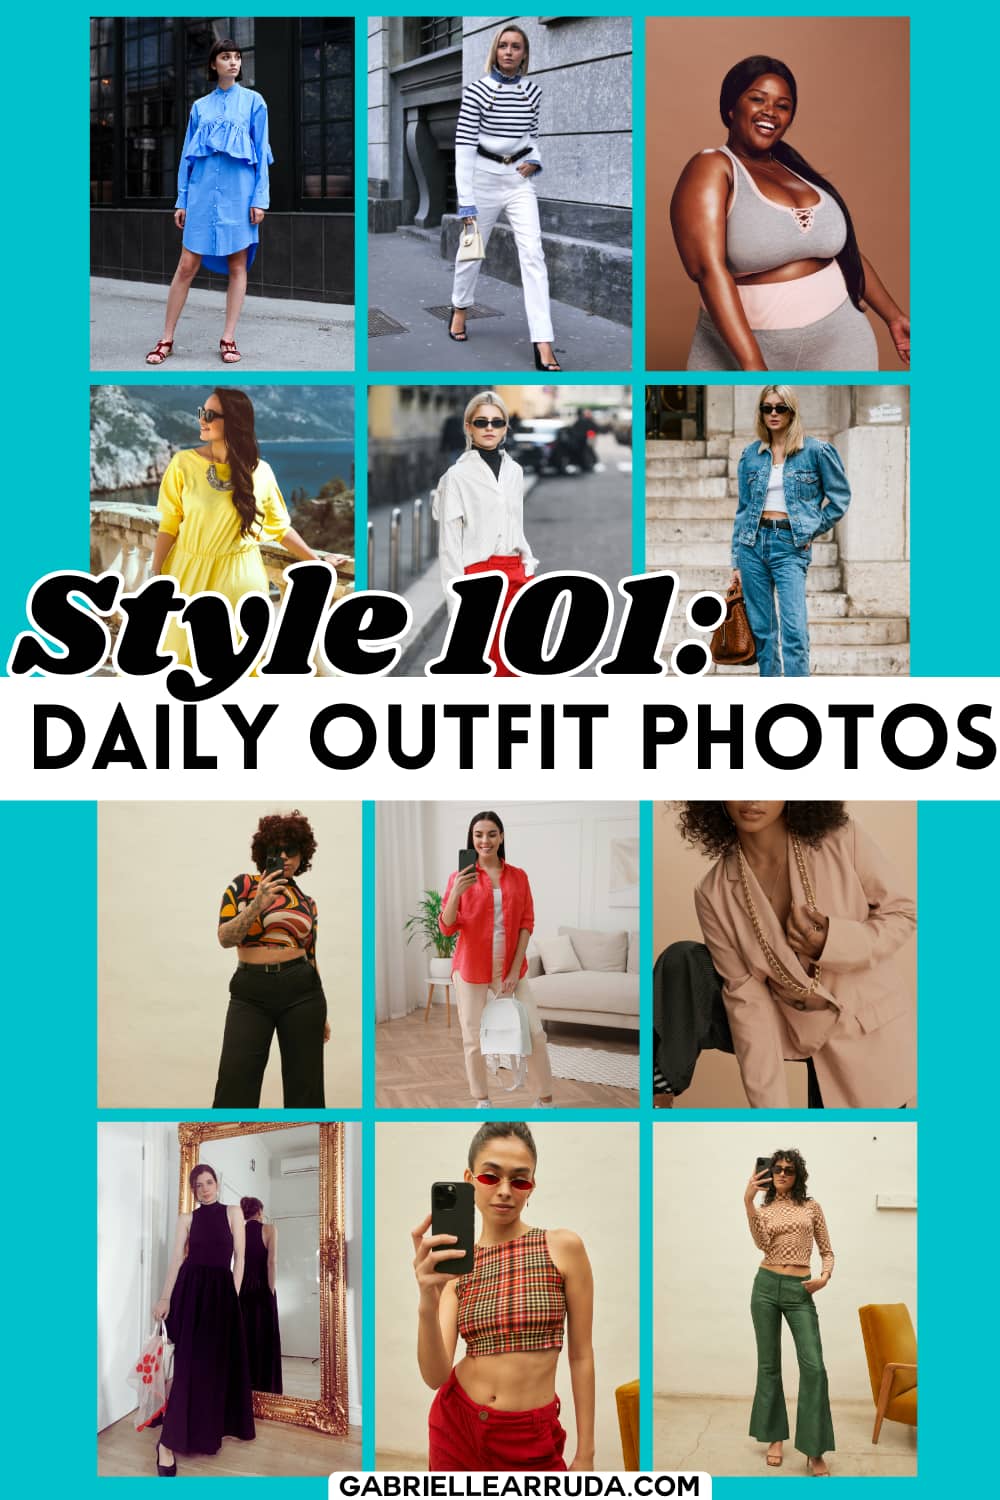 daily outfit photos the key to authentic style